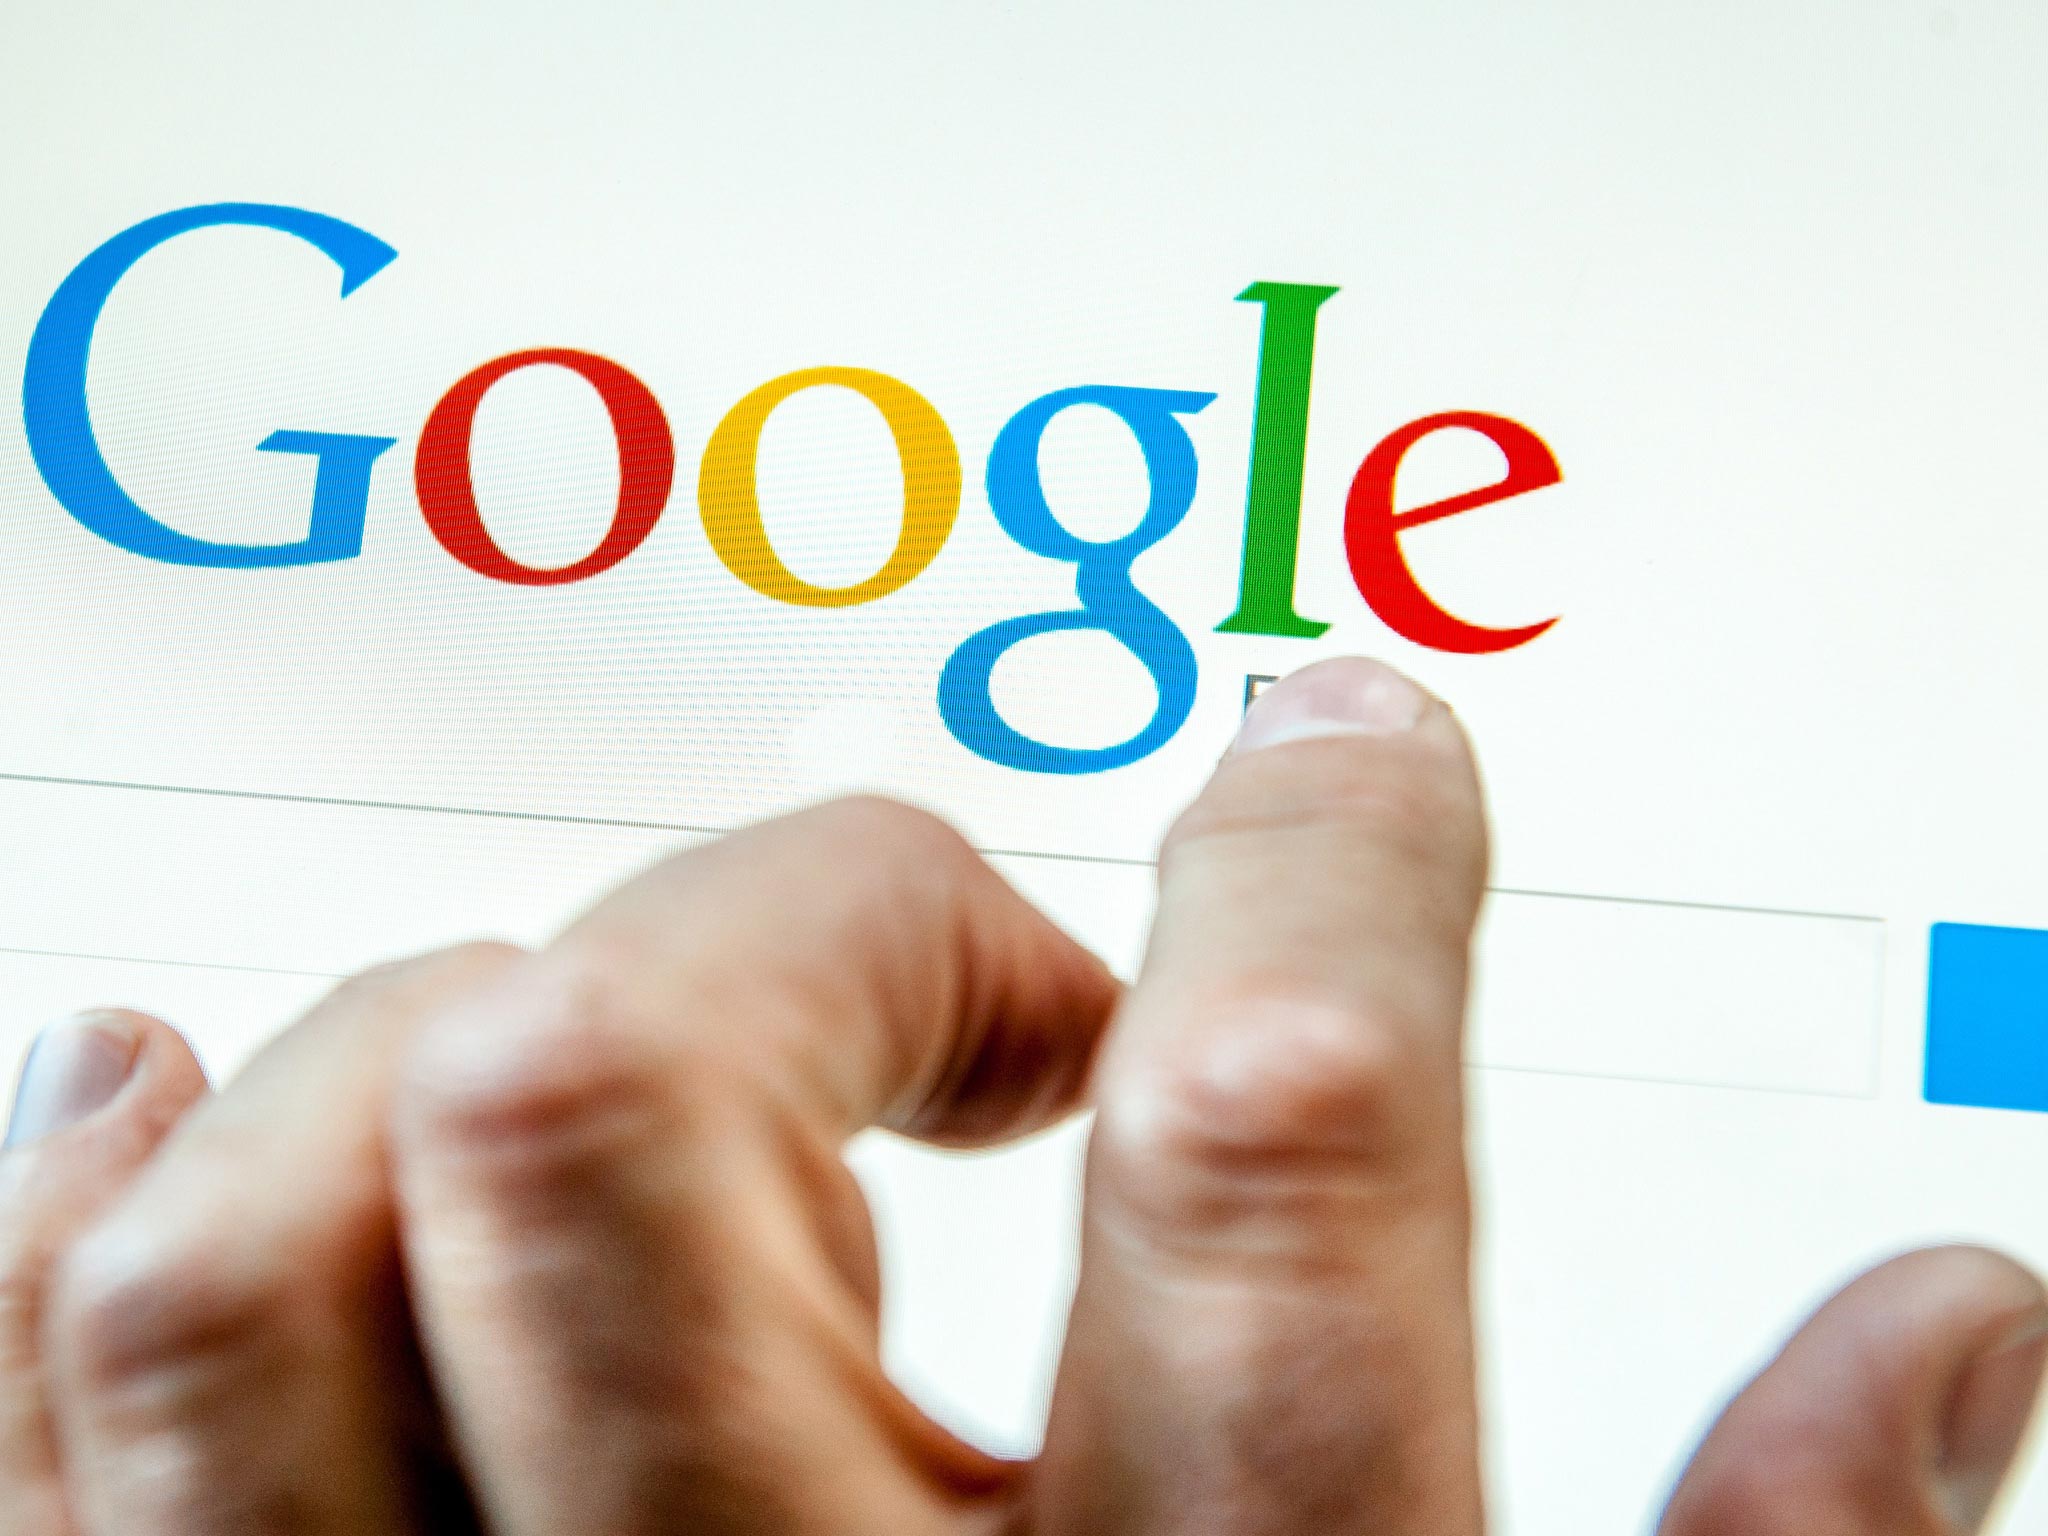 One in three small businesses rely on social media or Google for financial advice